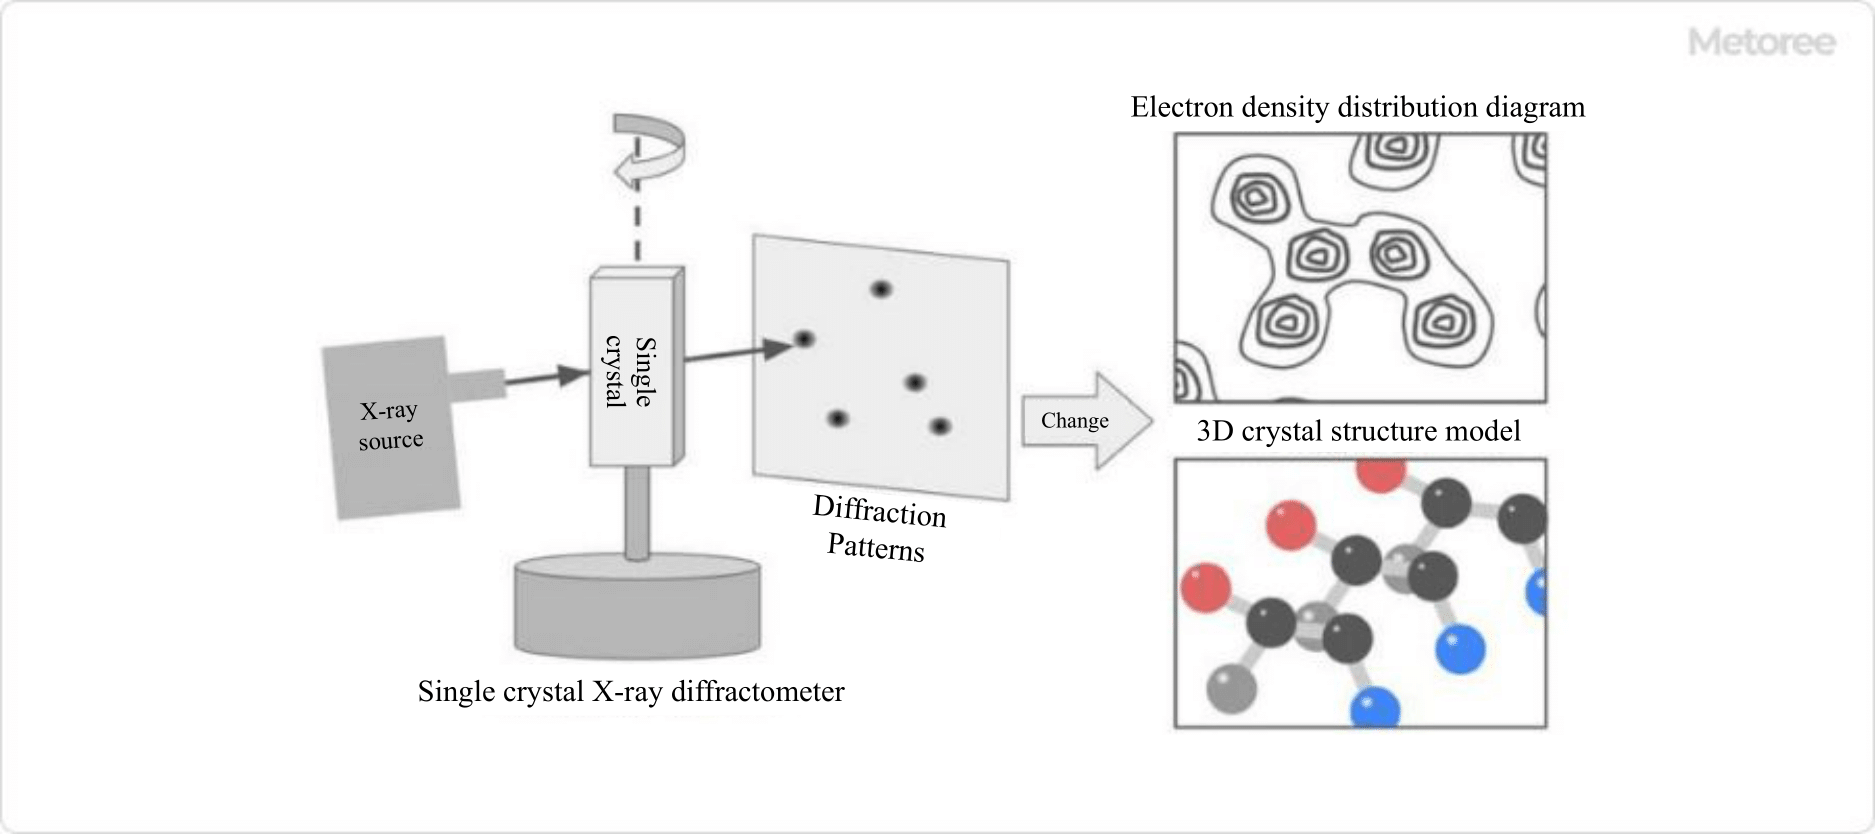 Figure 2. Single crystal X-ray diffractometer